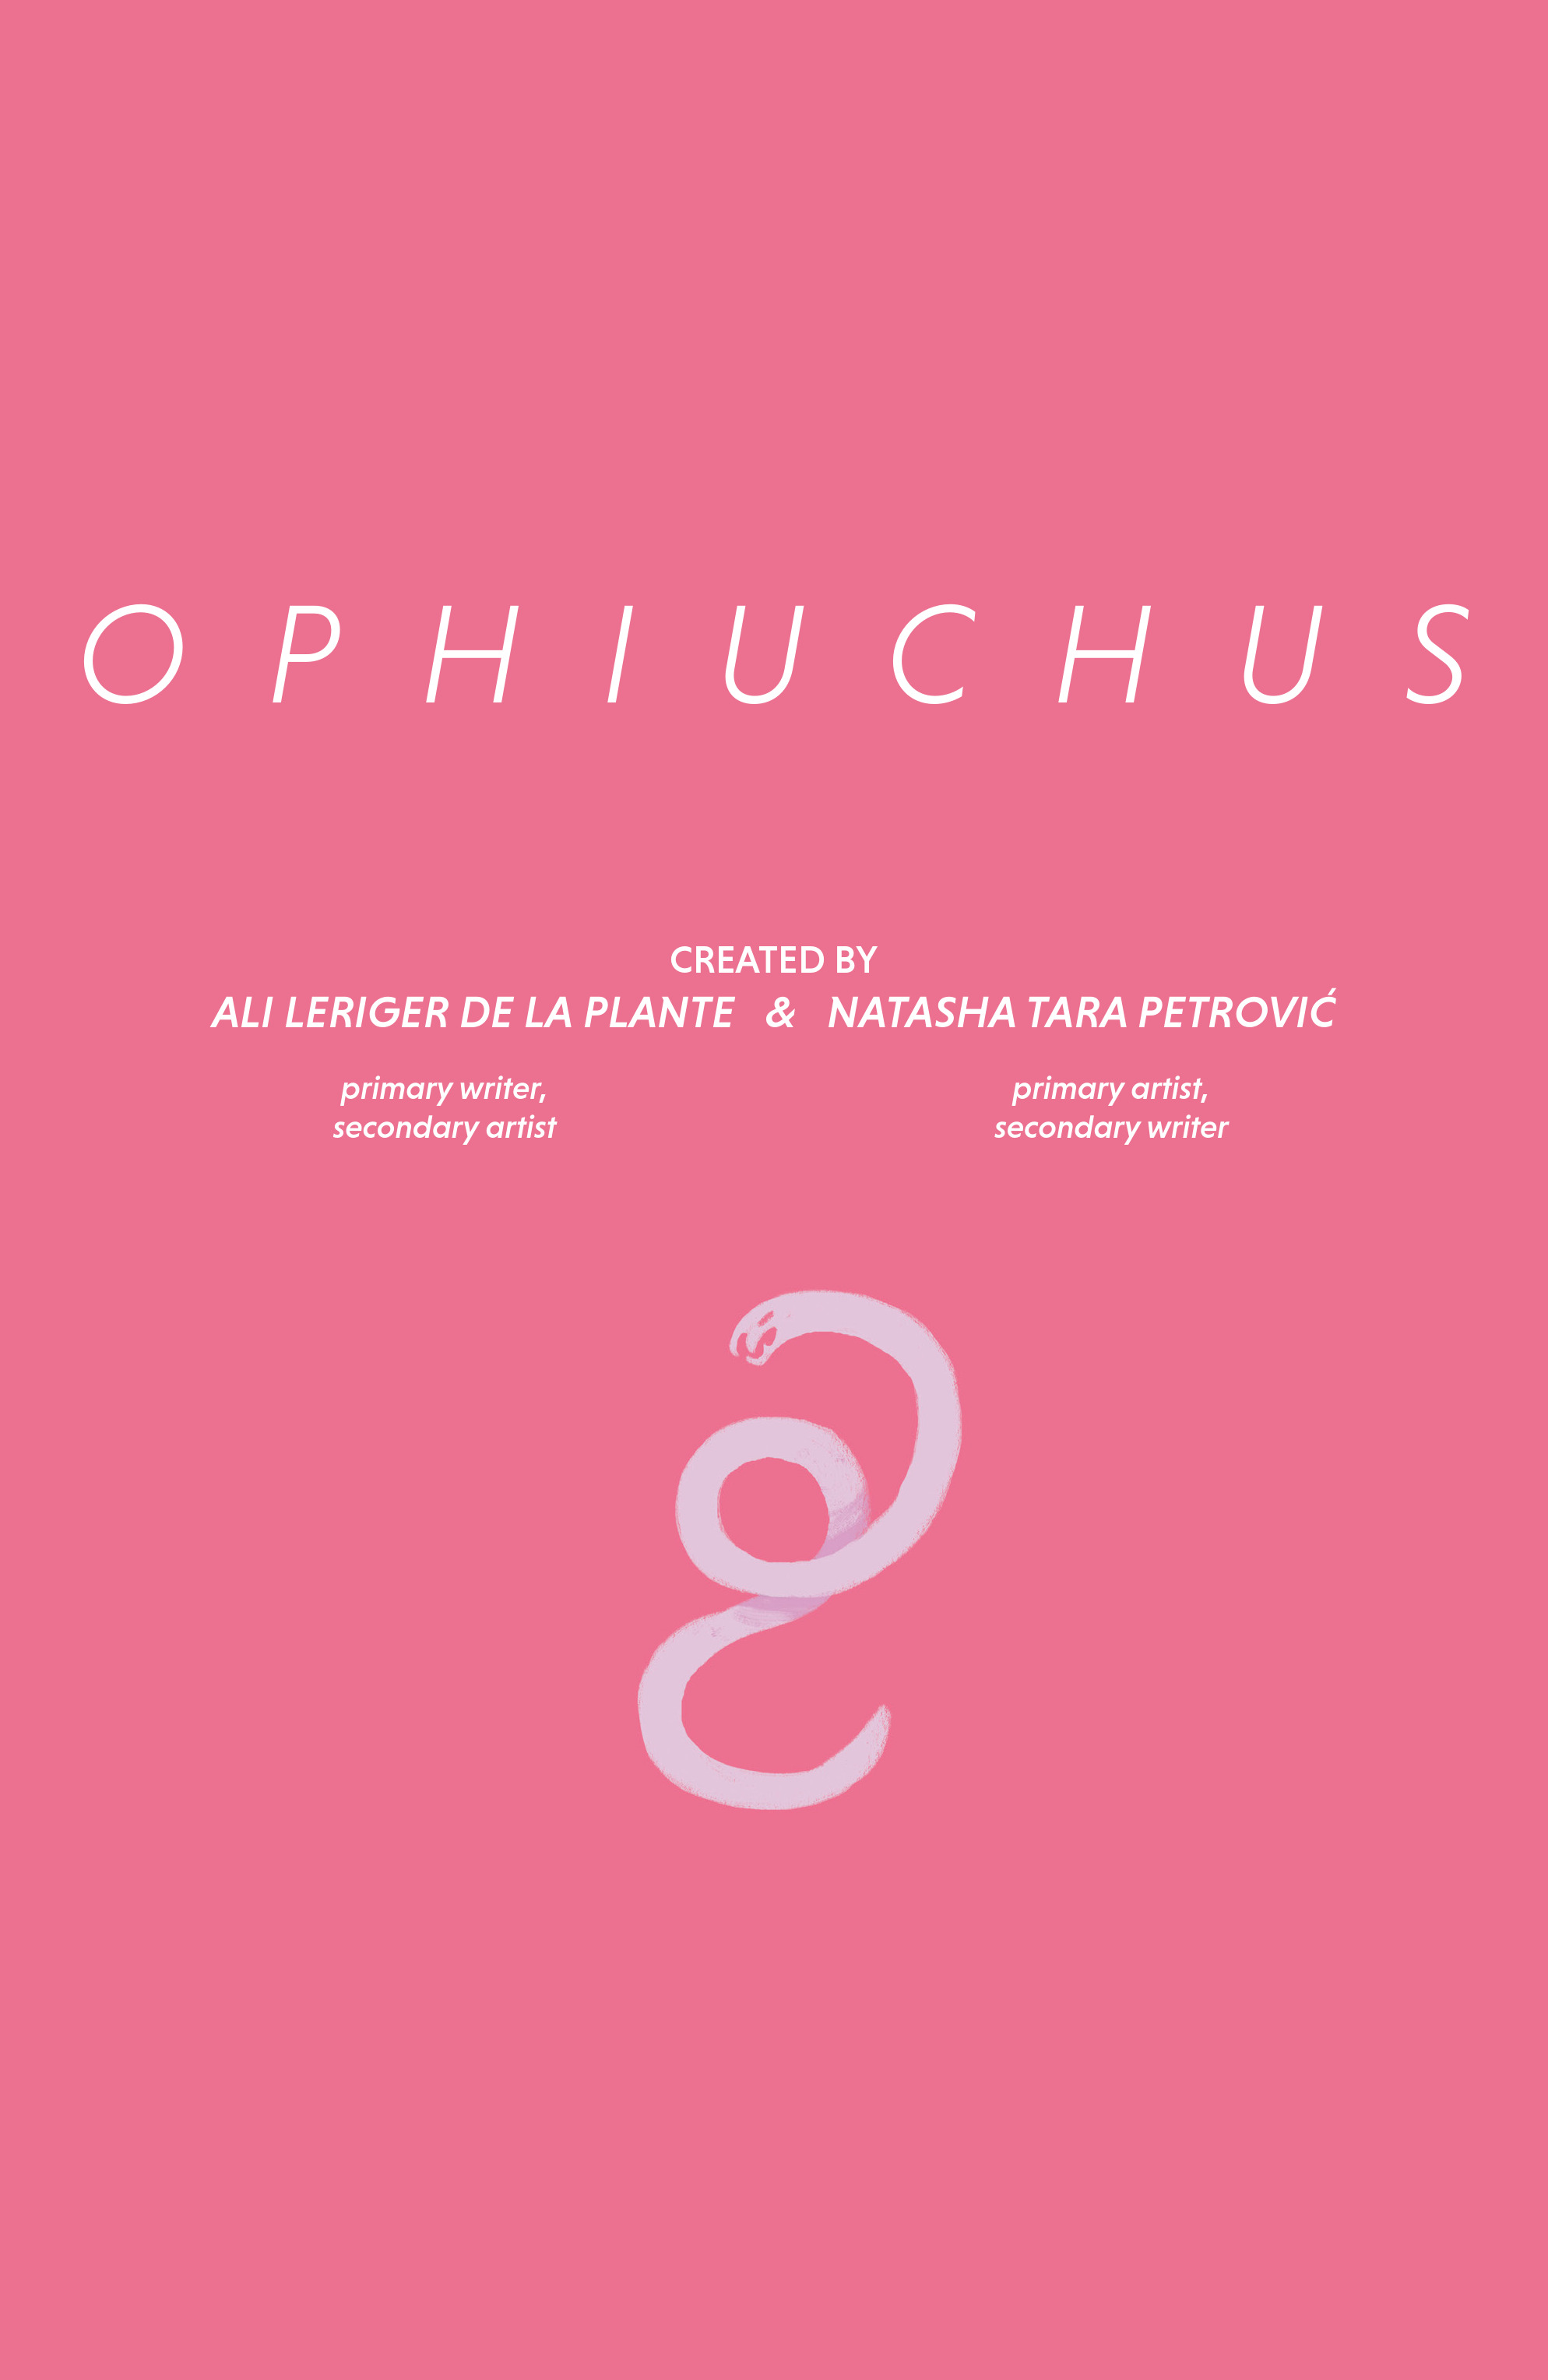 Read online Ophiuchus comic -  Issue # TPB - 5